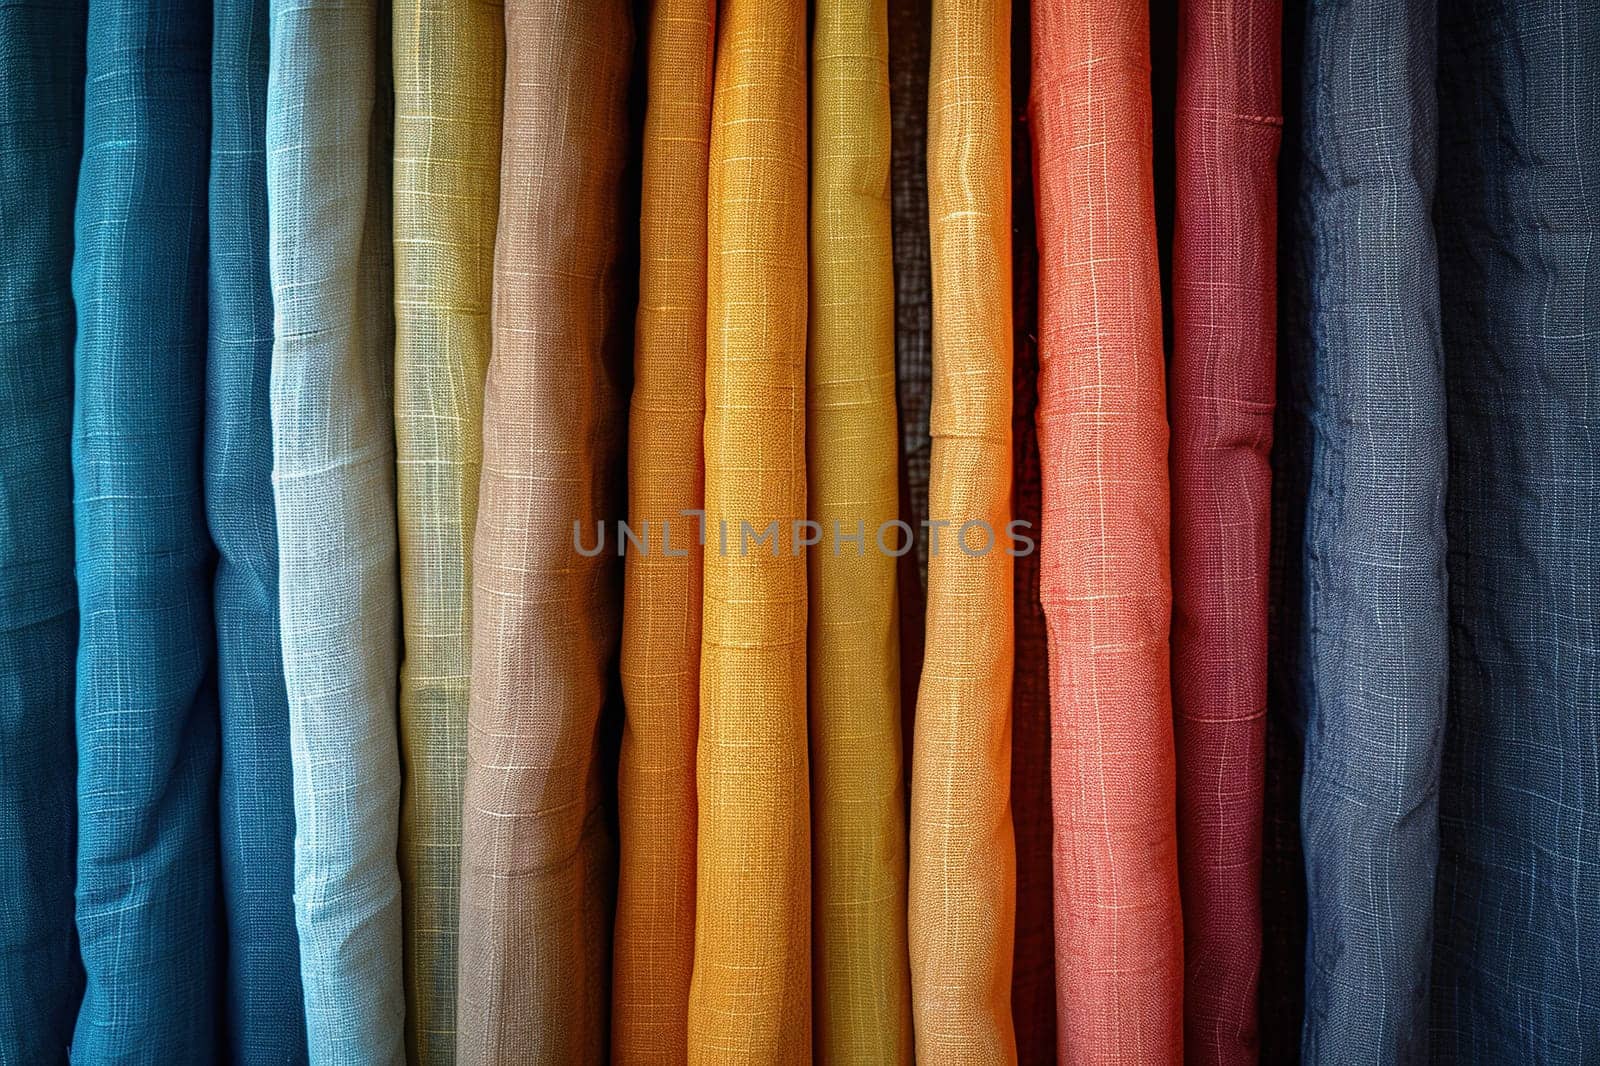 A row of curtains of different colors close-up.